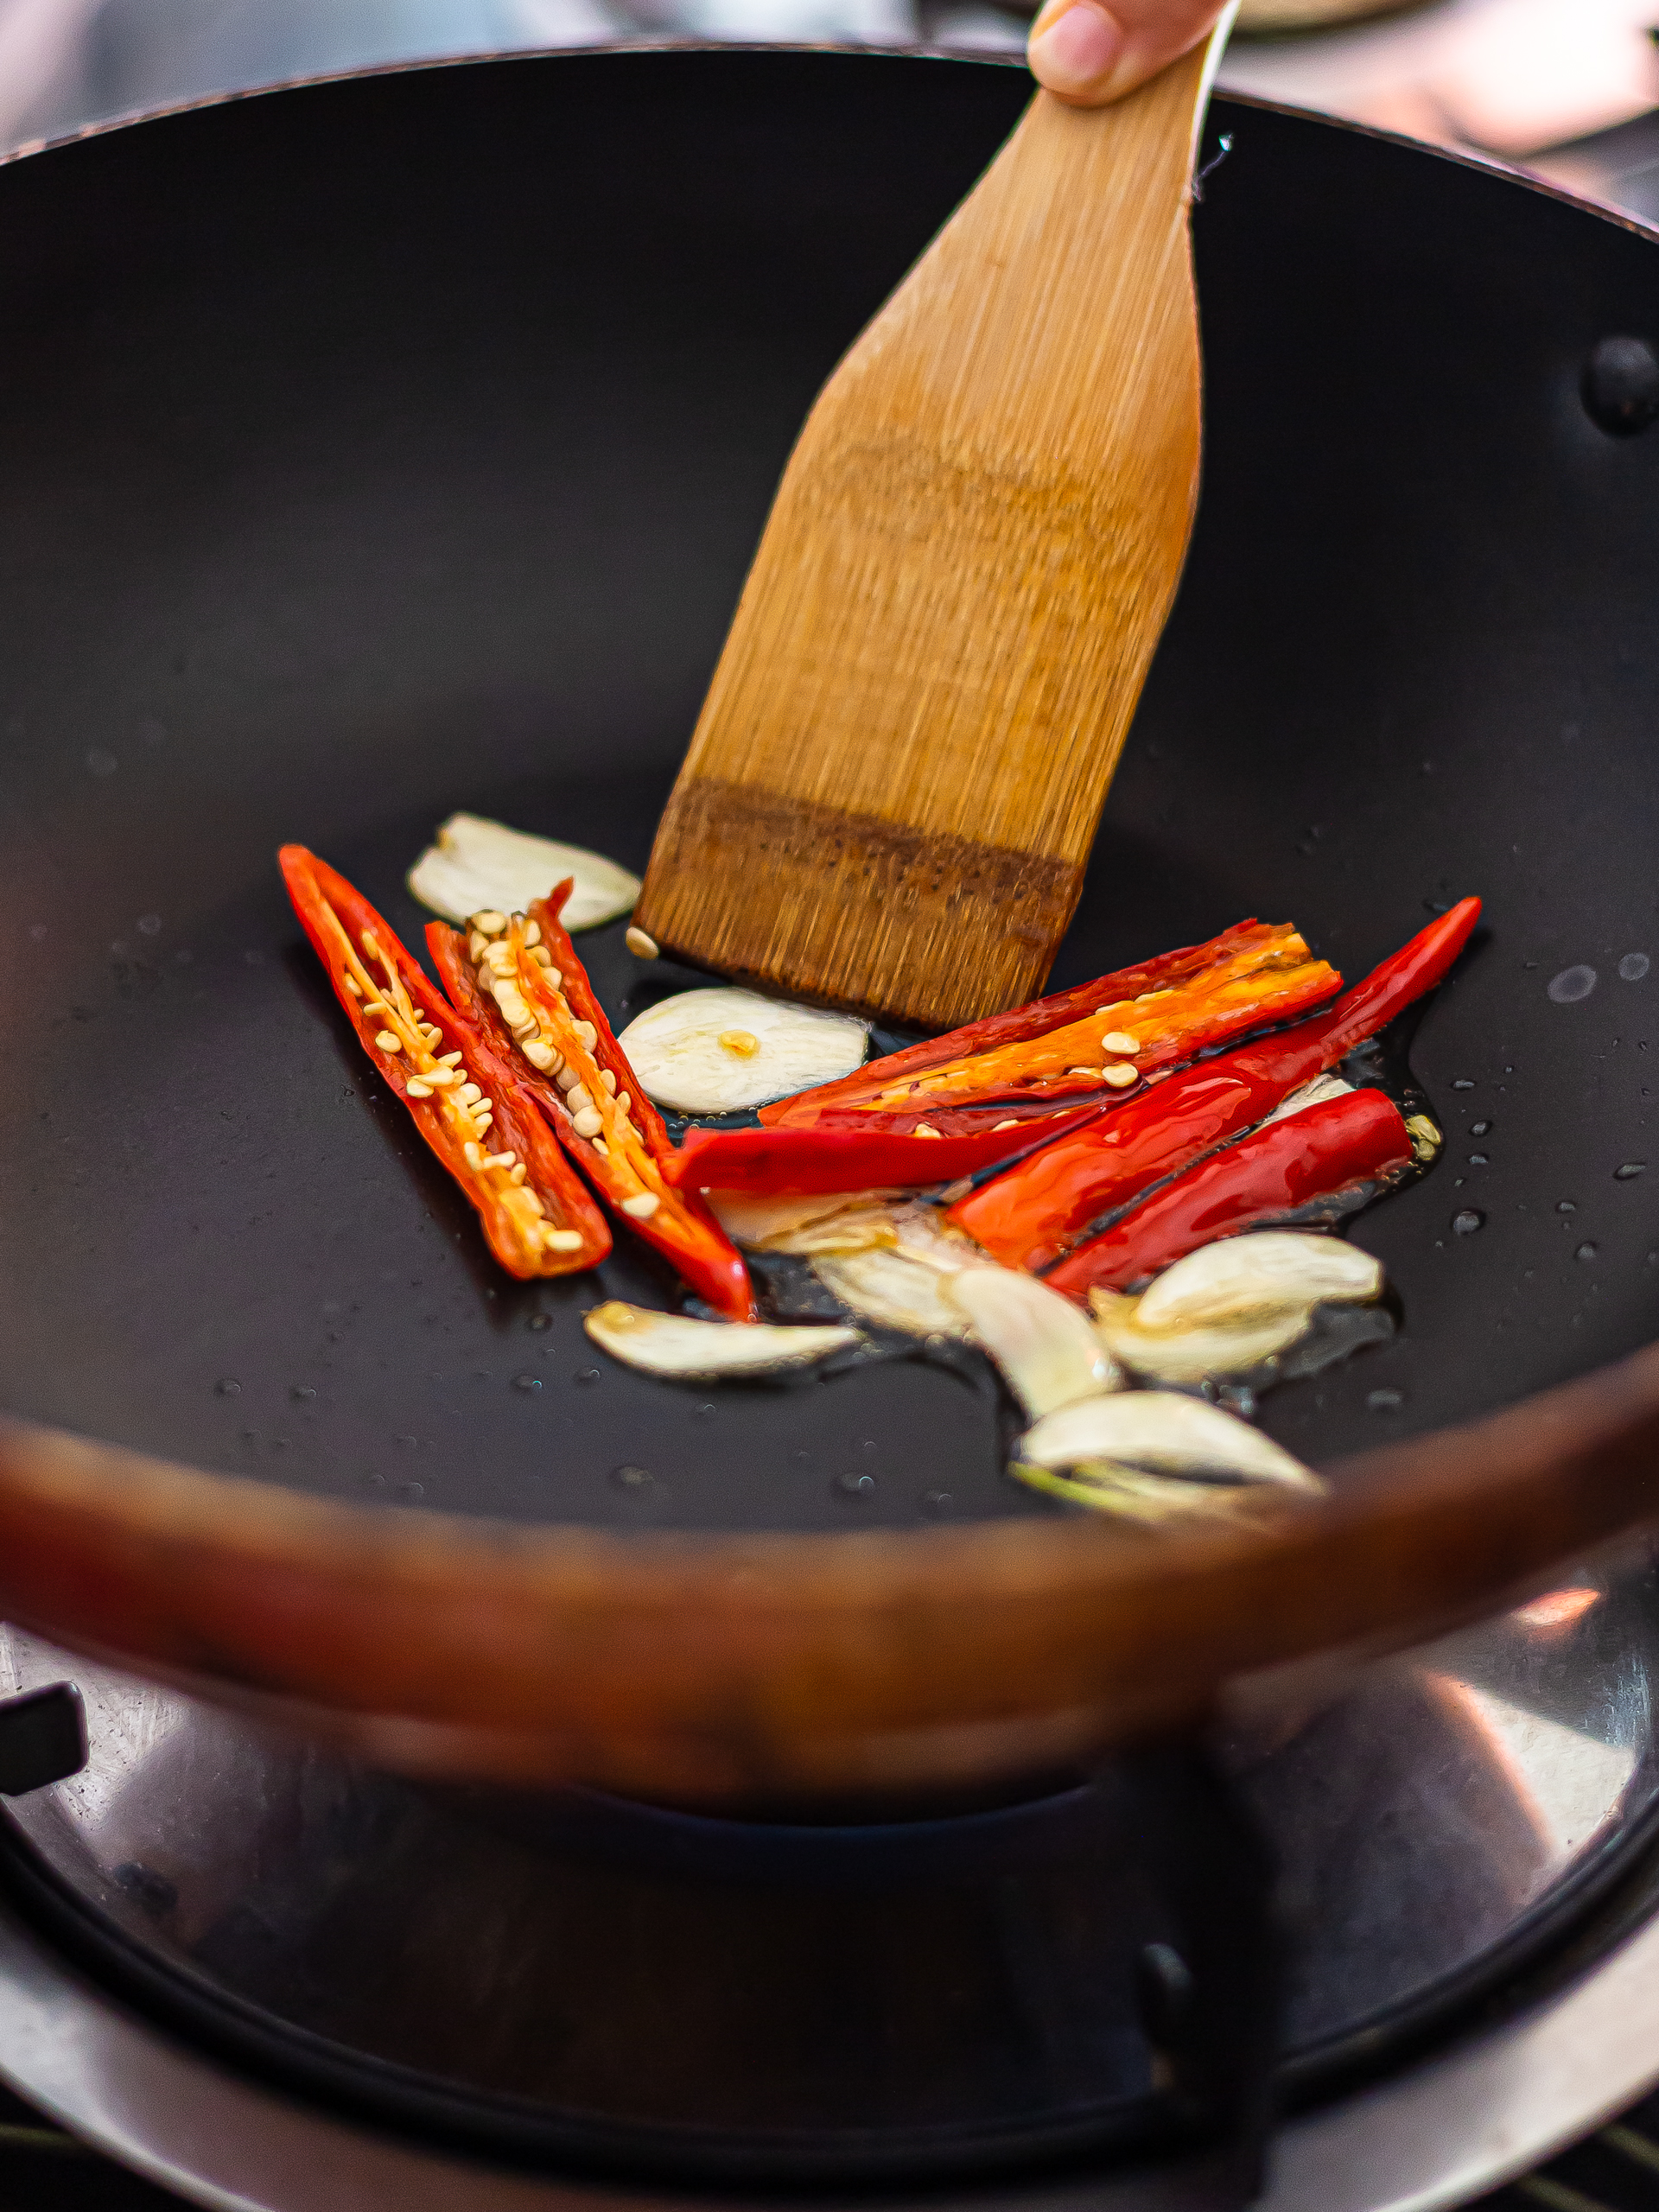 oil and garlic sizzling in a skillet